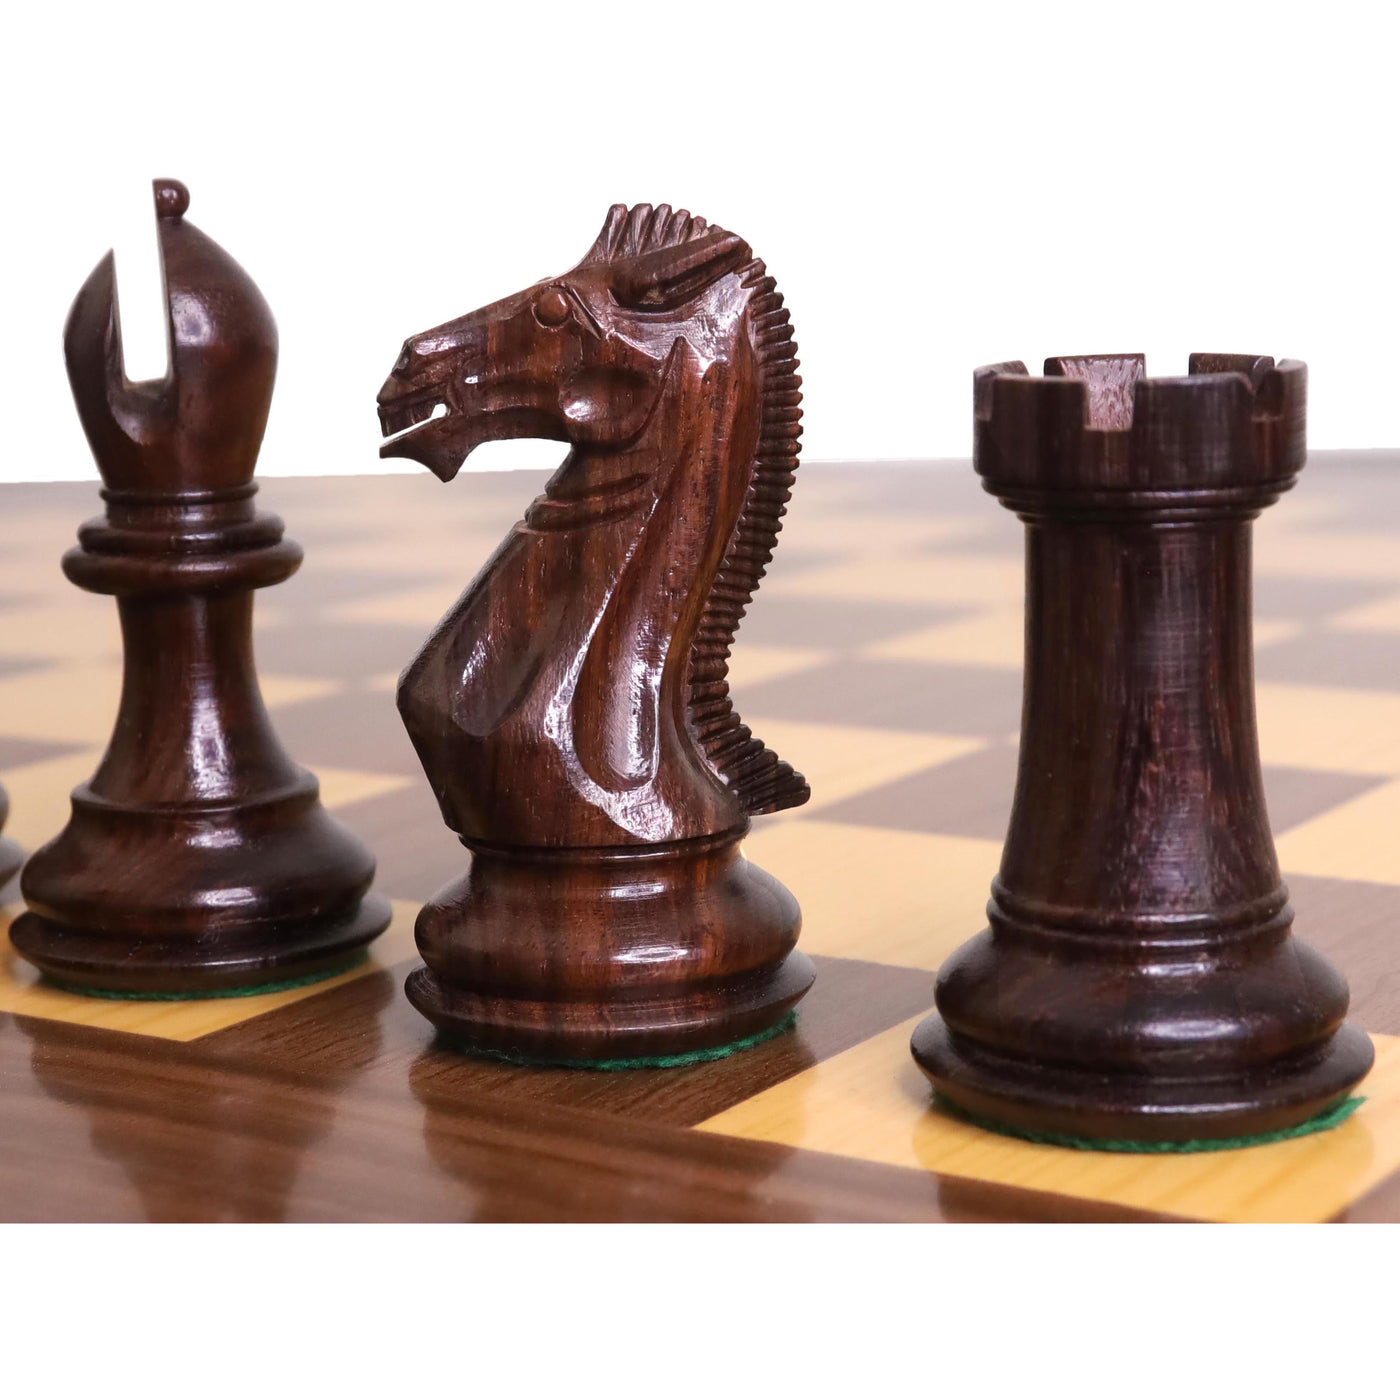 4.1″ Traveller Staunton Luxury Chess Set - Chess Pieces Only – Triple Weighted Rosewood